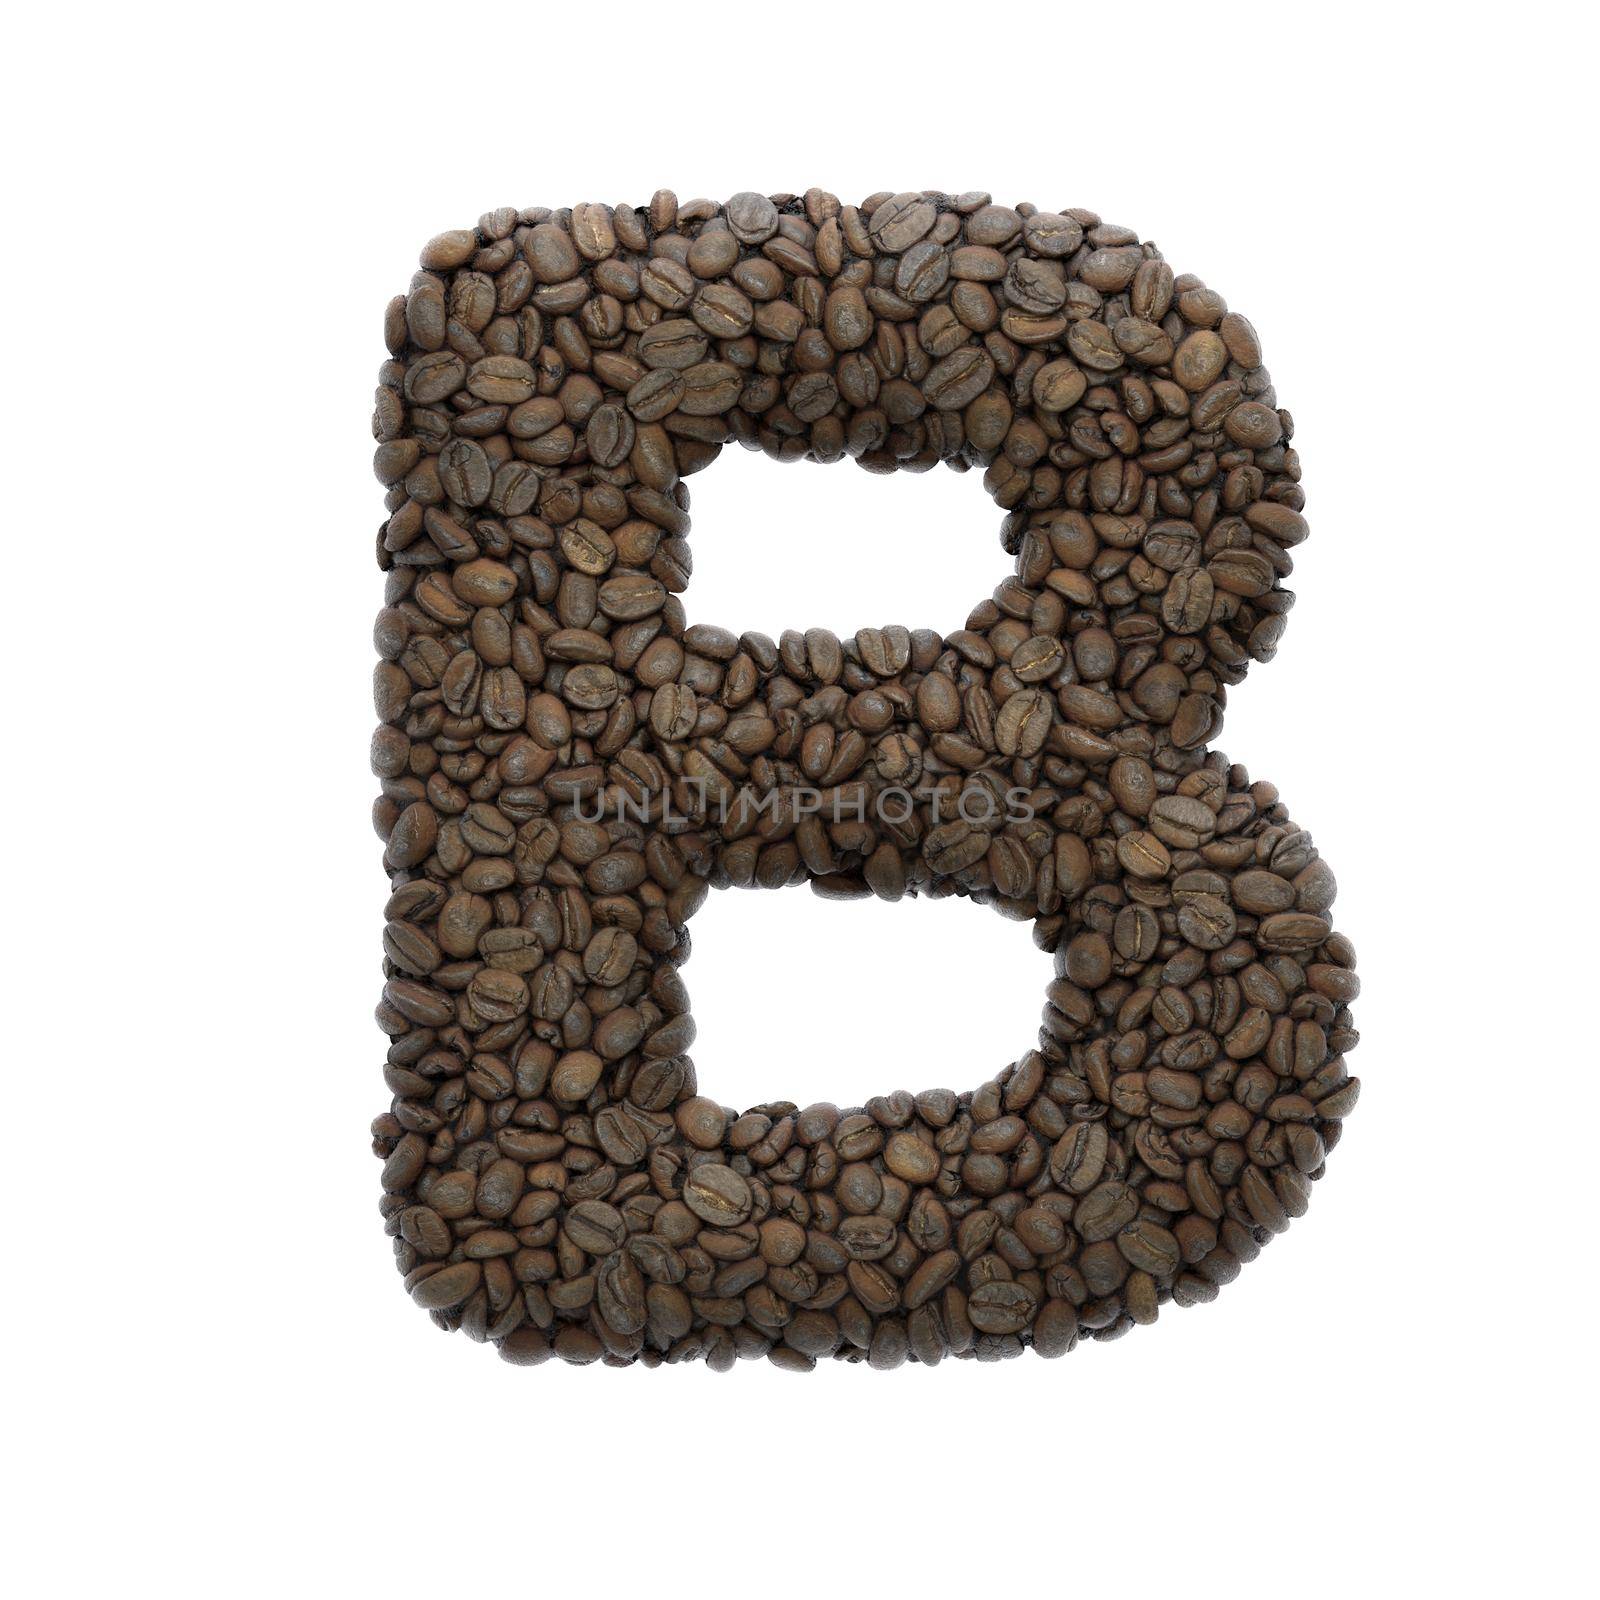 Coffee letter B - large 3d roasted beans font isolated on white background. This alphabet is perfect for creative illustrations related but not limited to Coffee, energy, insomnia...